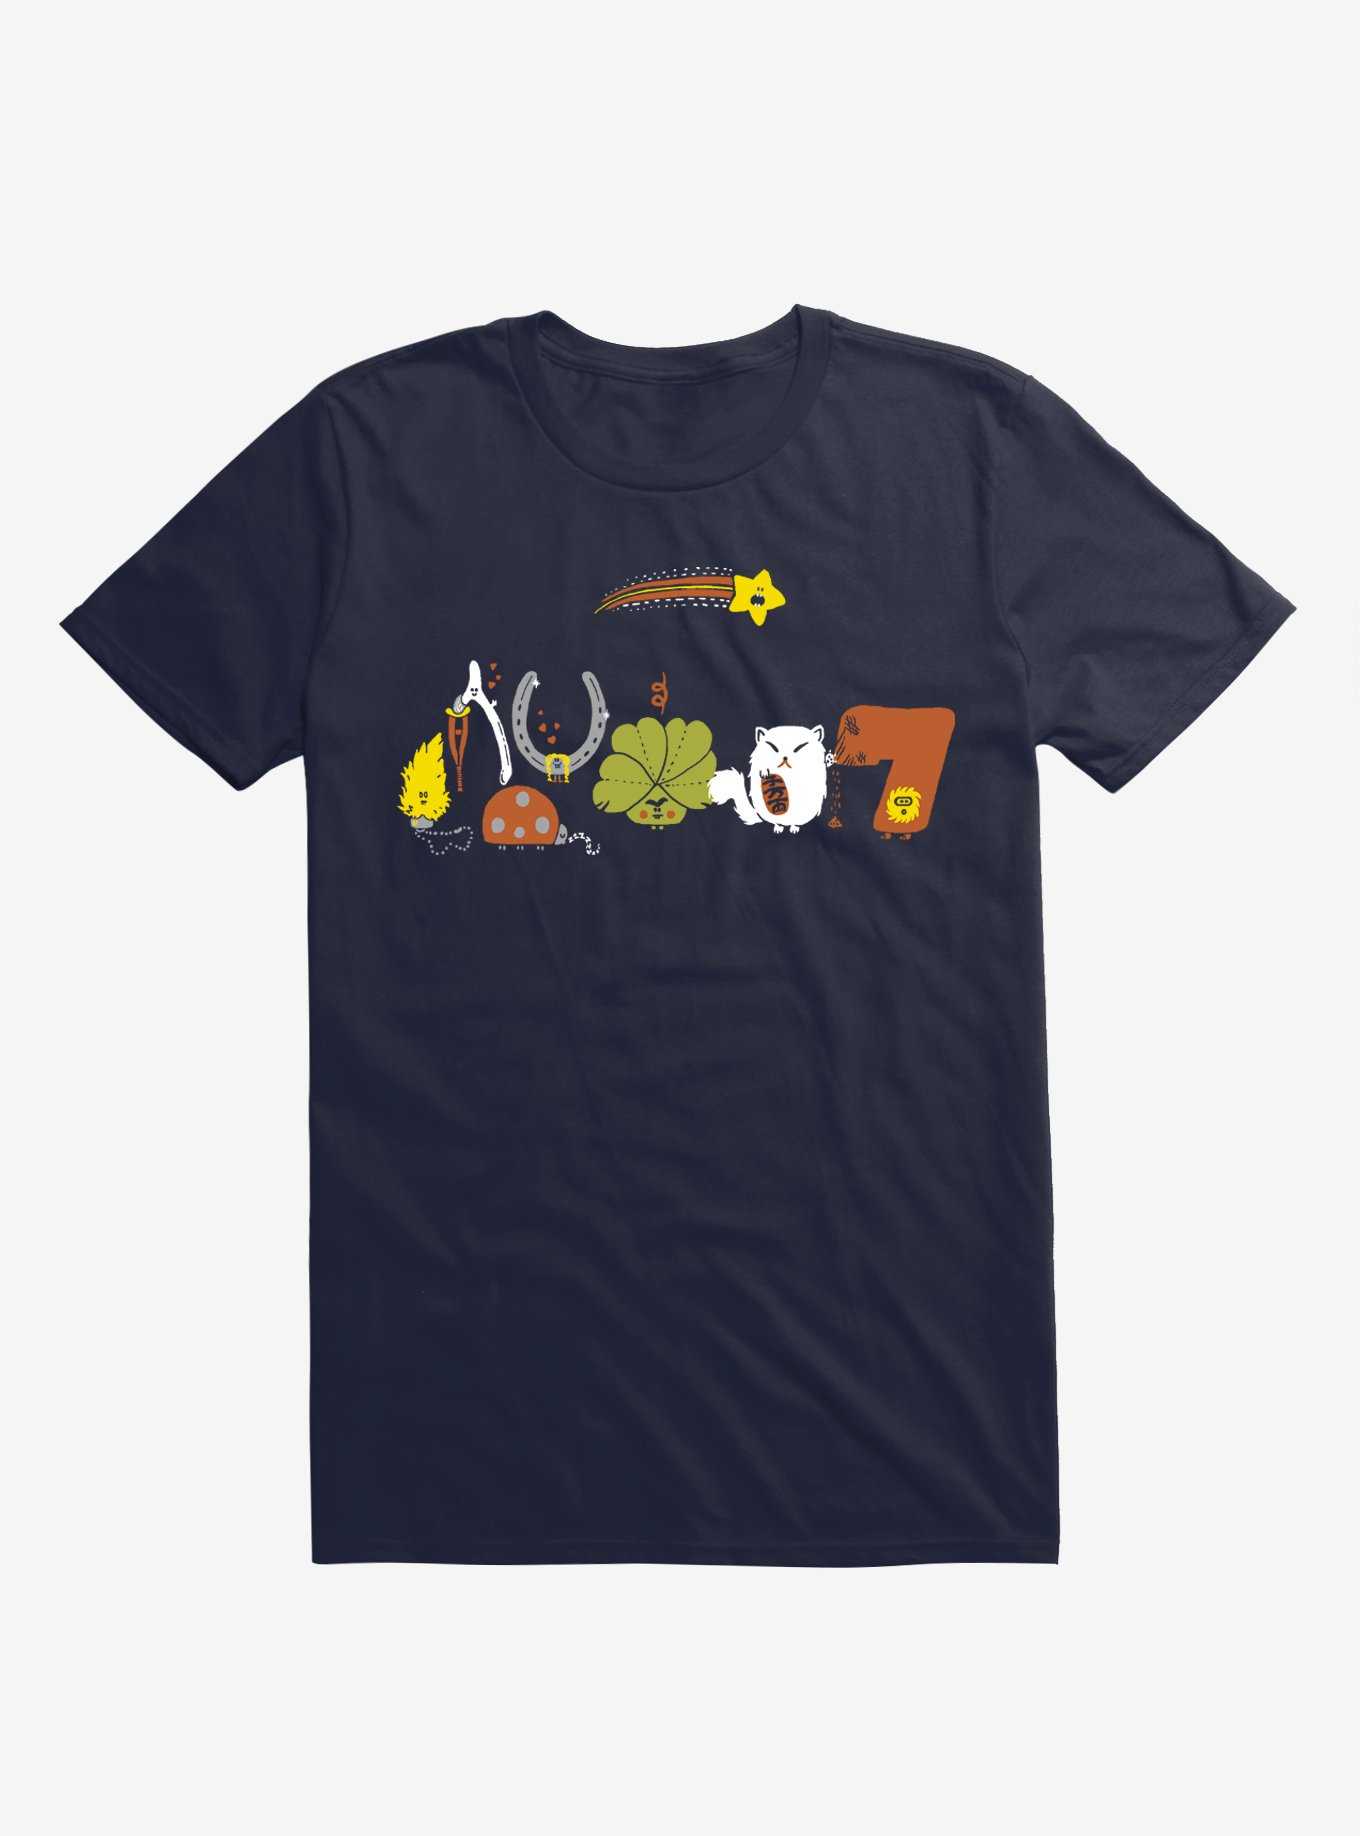 Luckiest T-Shirt Ever Icons Navy Blue T-Shirt, , hi-res